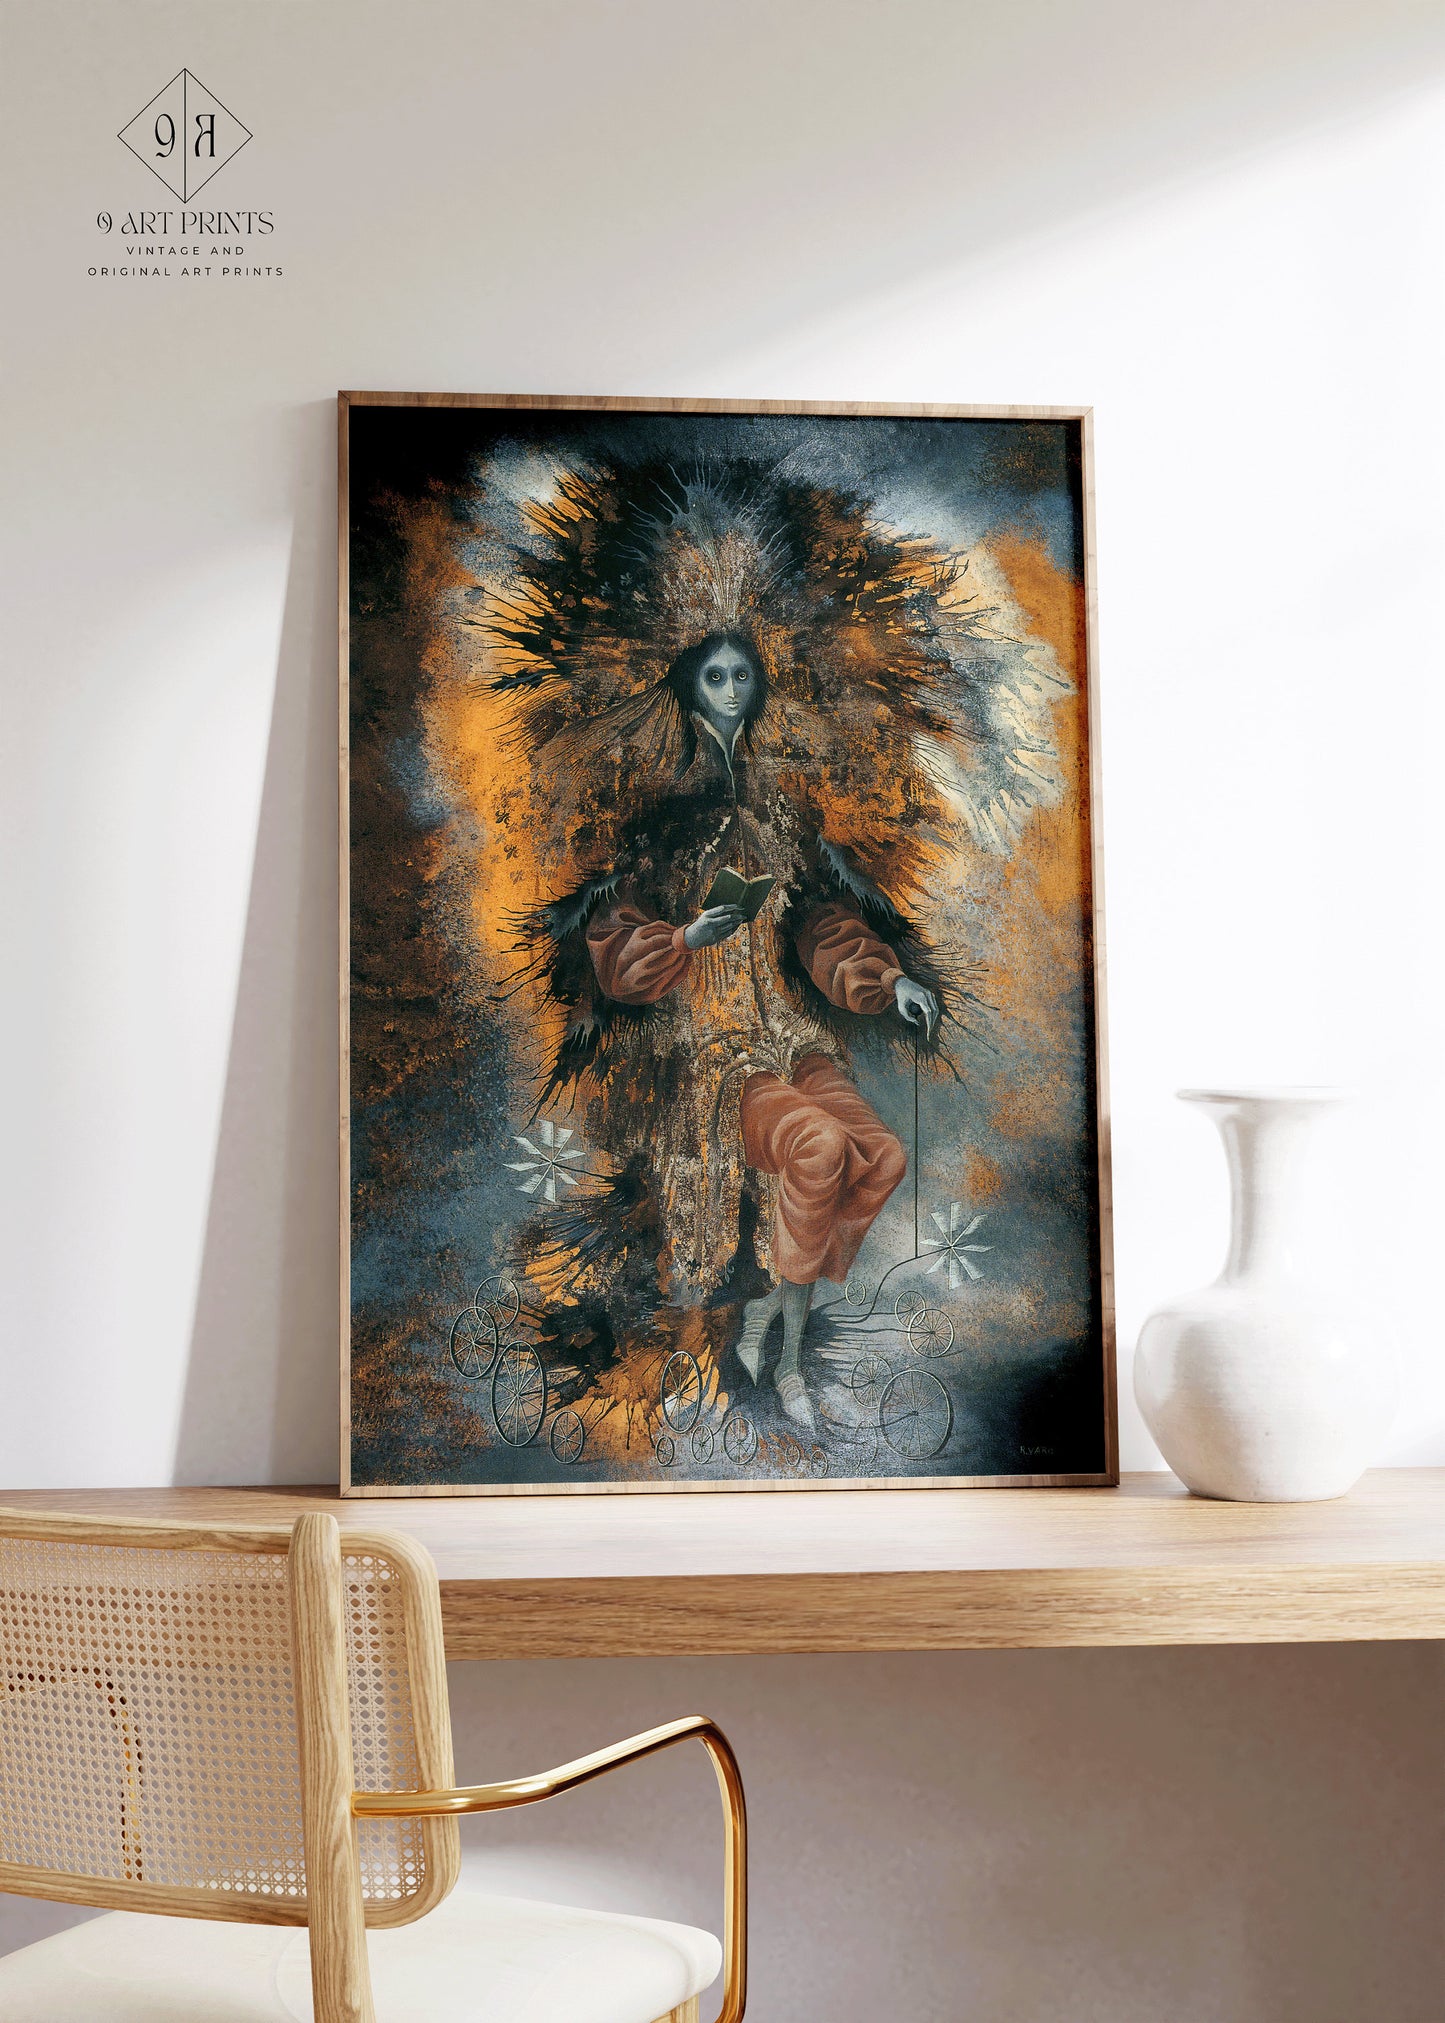 Remedios Varo 'Character' Fine Surreal Art Famous Mexican Iconic Painting Vintage Ready to hang Framed Home Office Decor Print Gift Idea